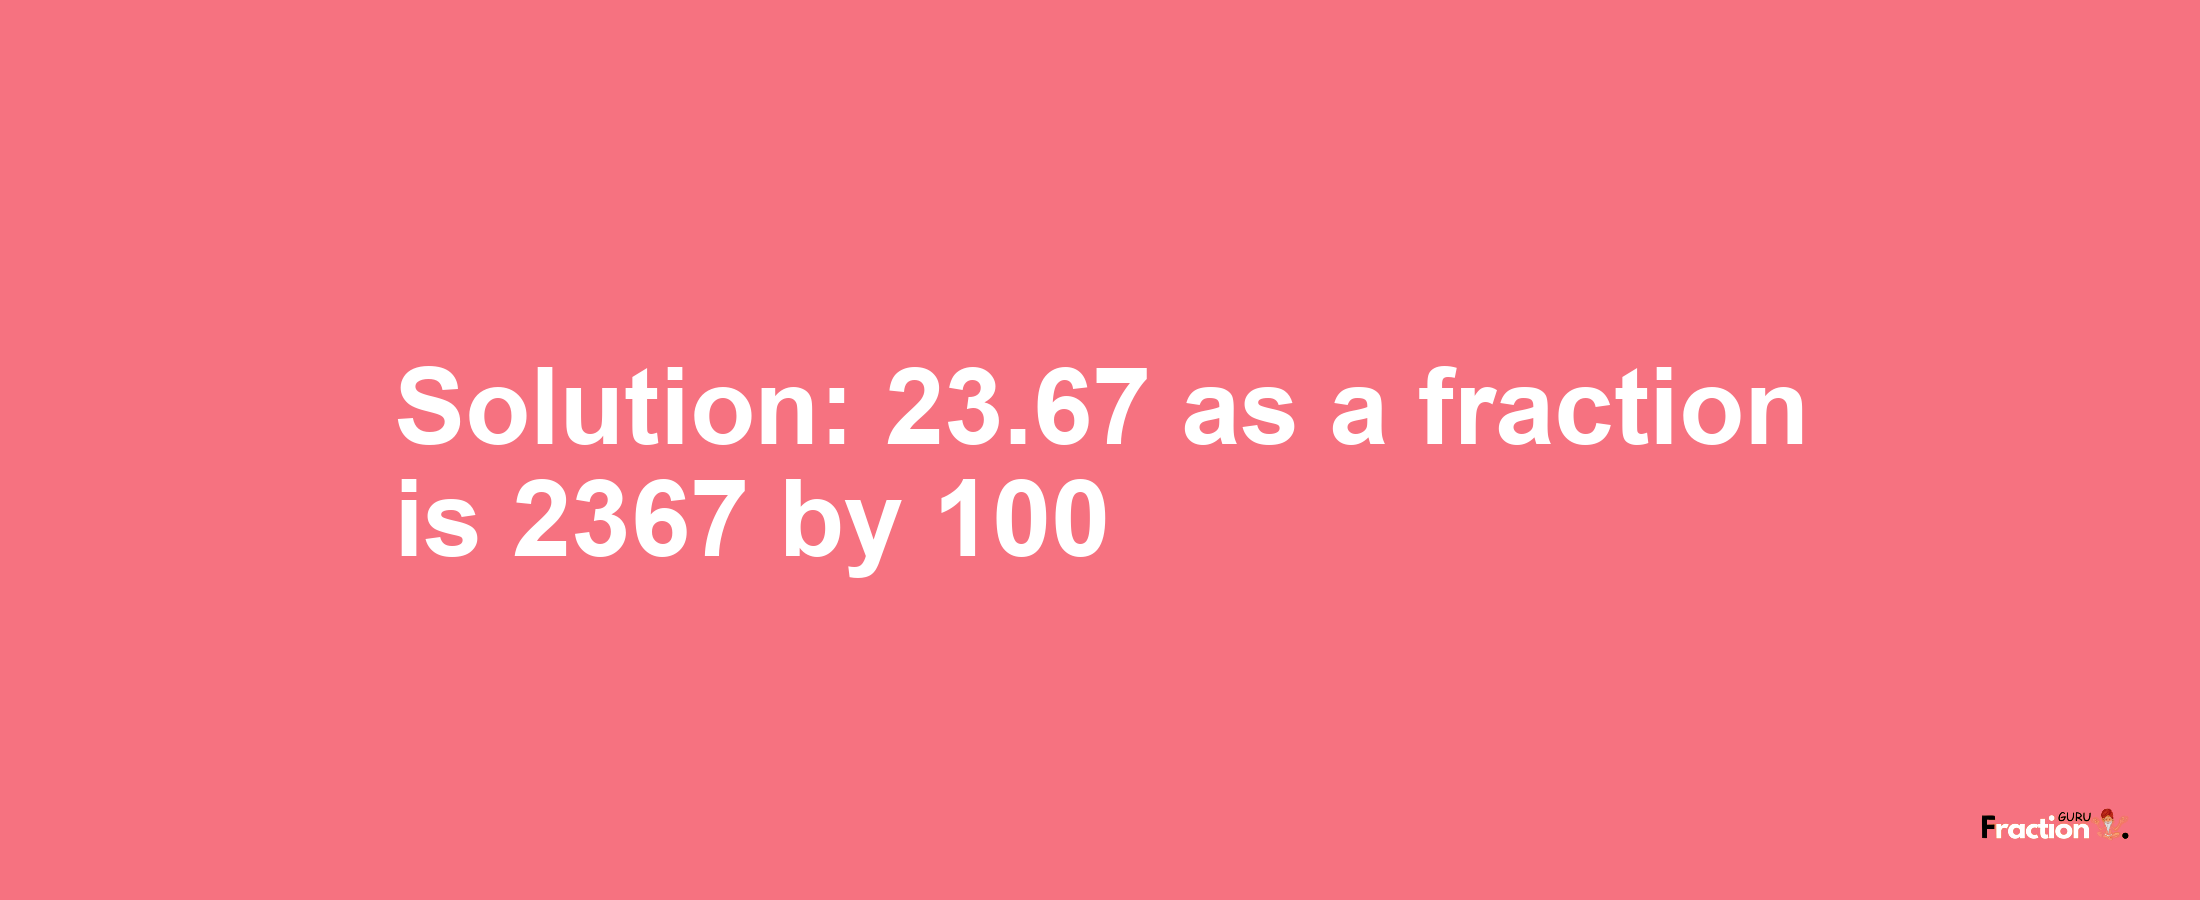 Solution:23.67 as a fraction is 2367/100